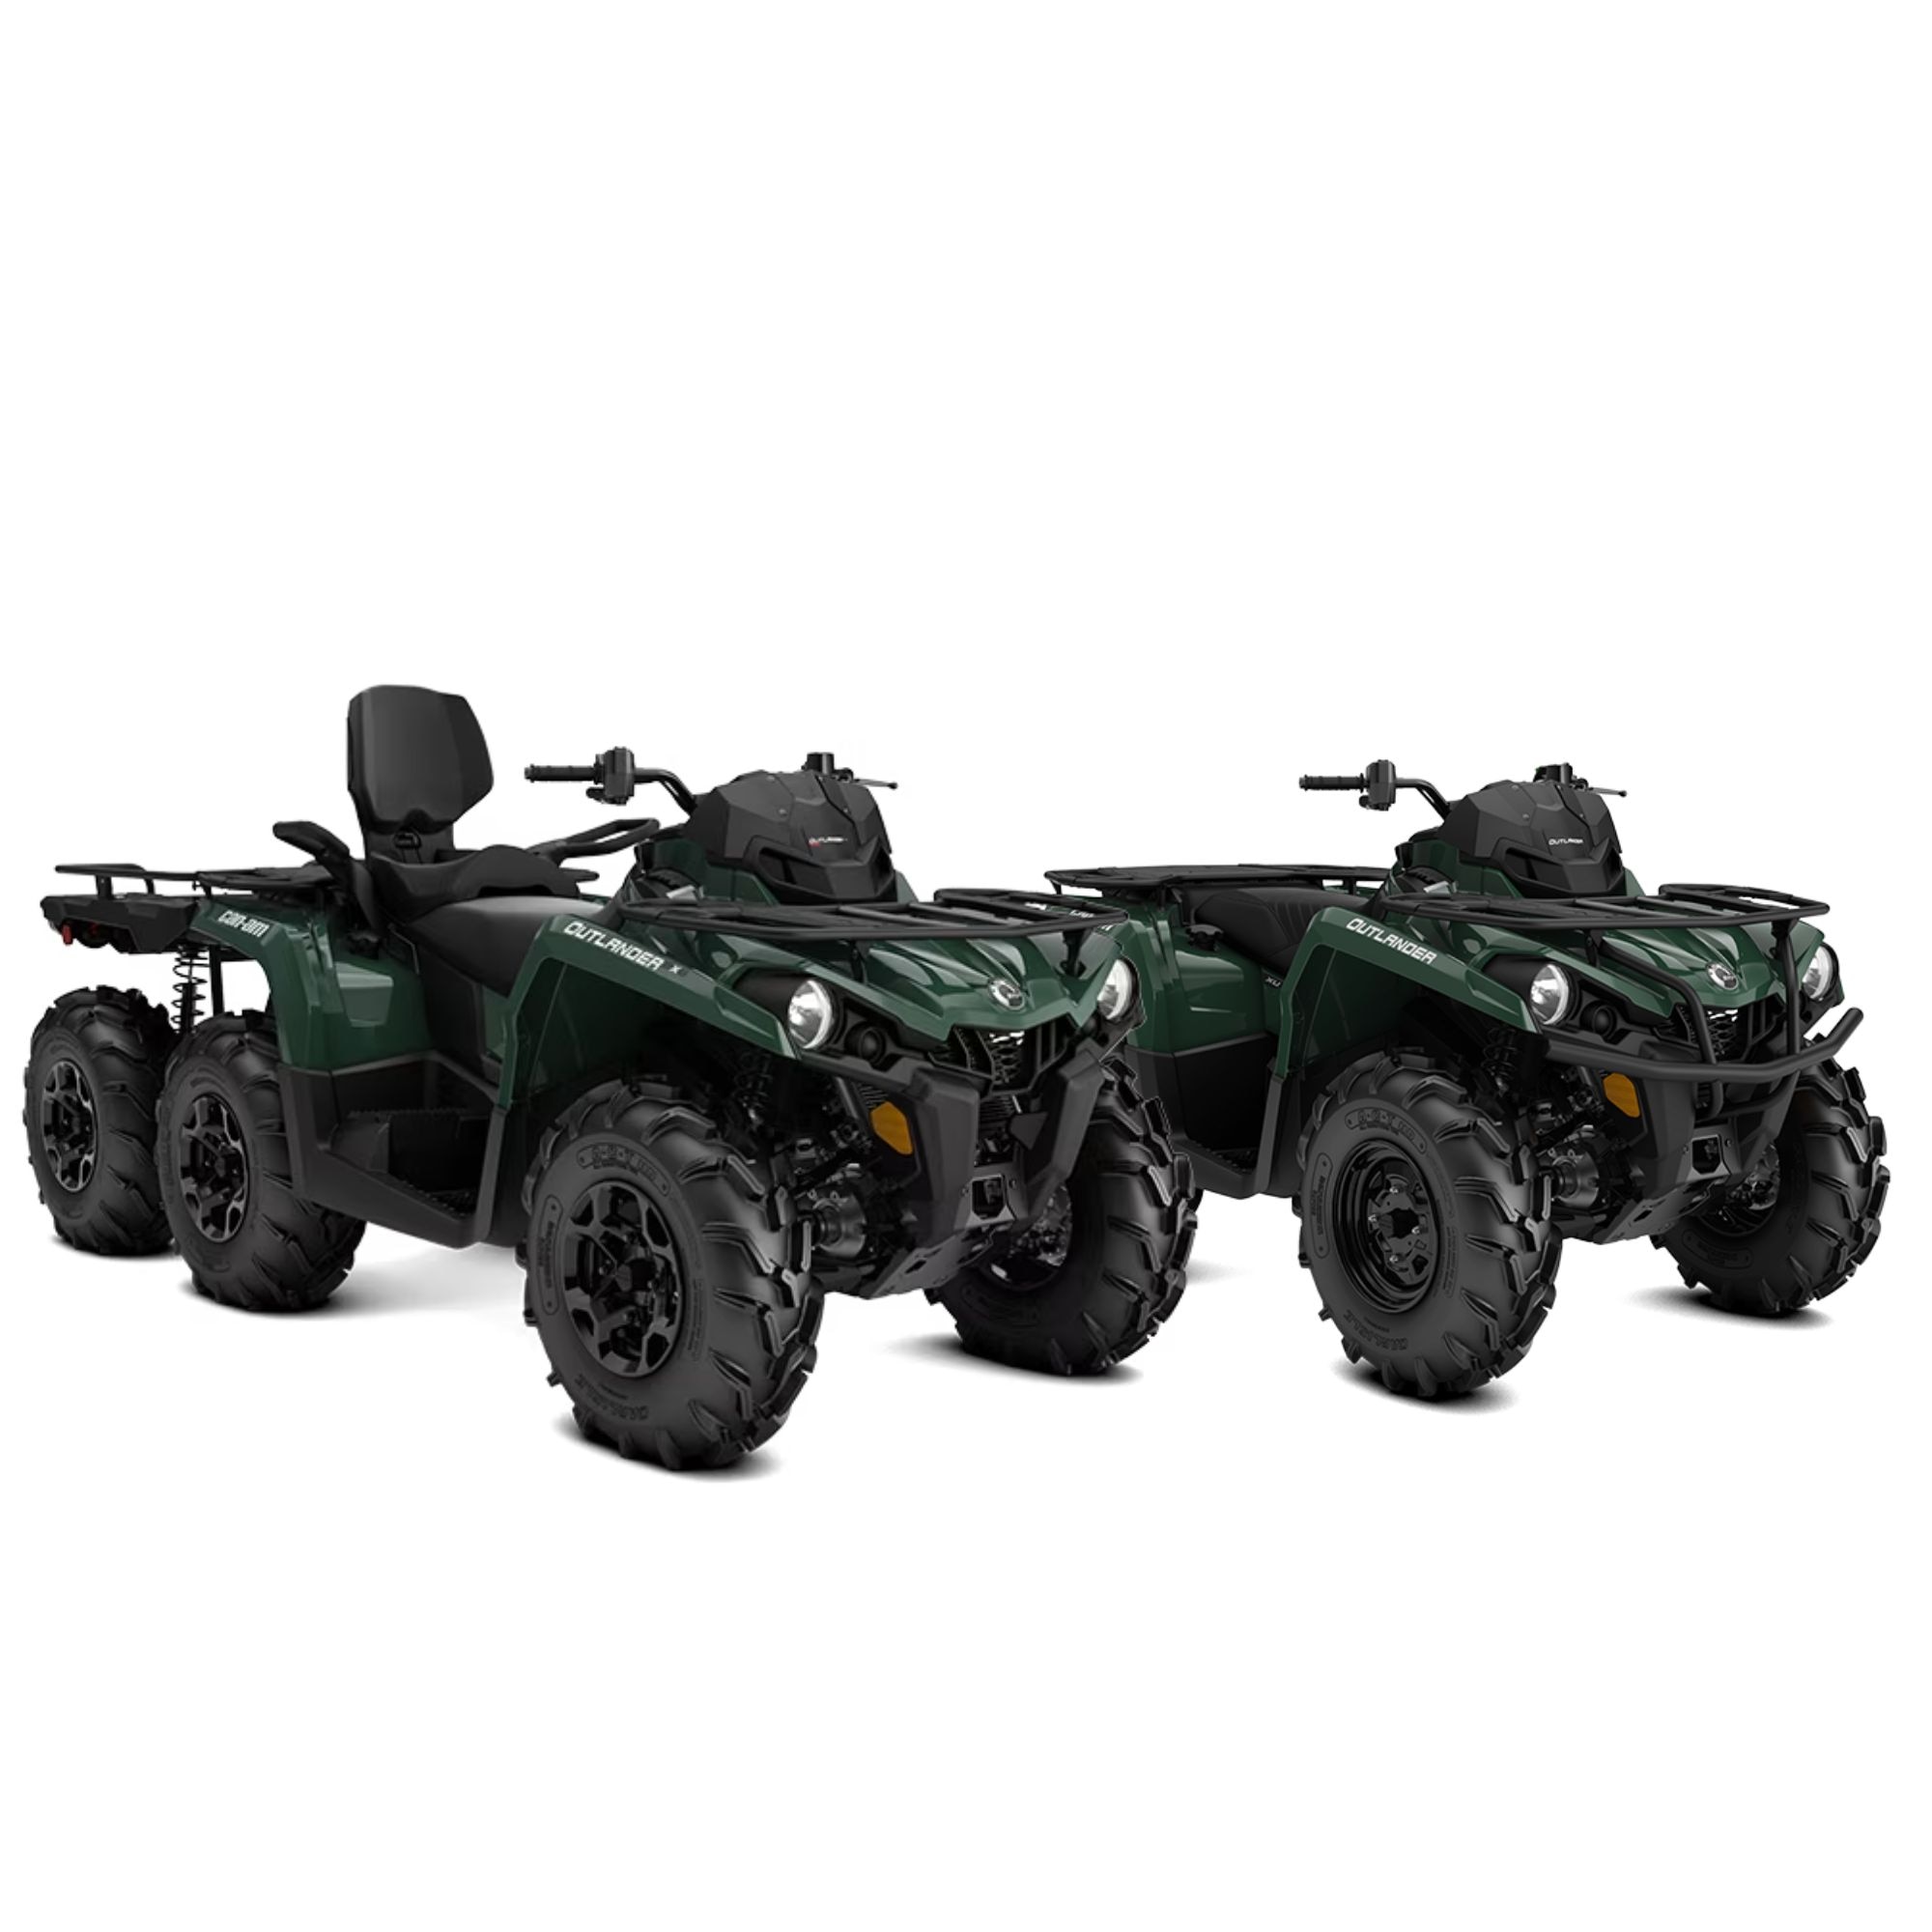 Two Can-Am Outlander 6x6 models.